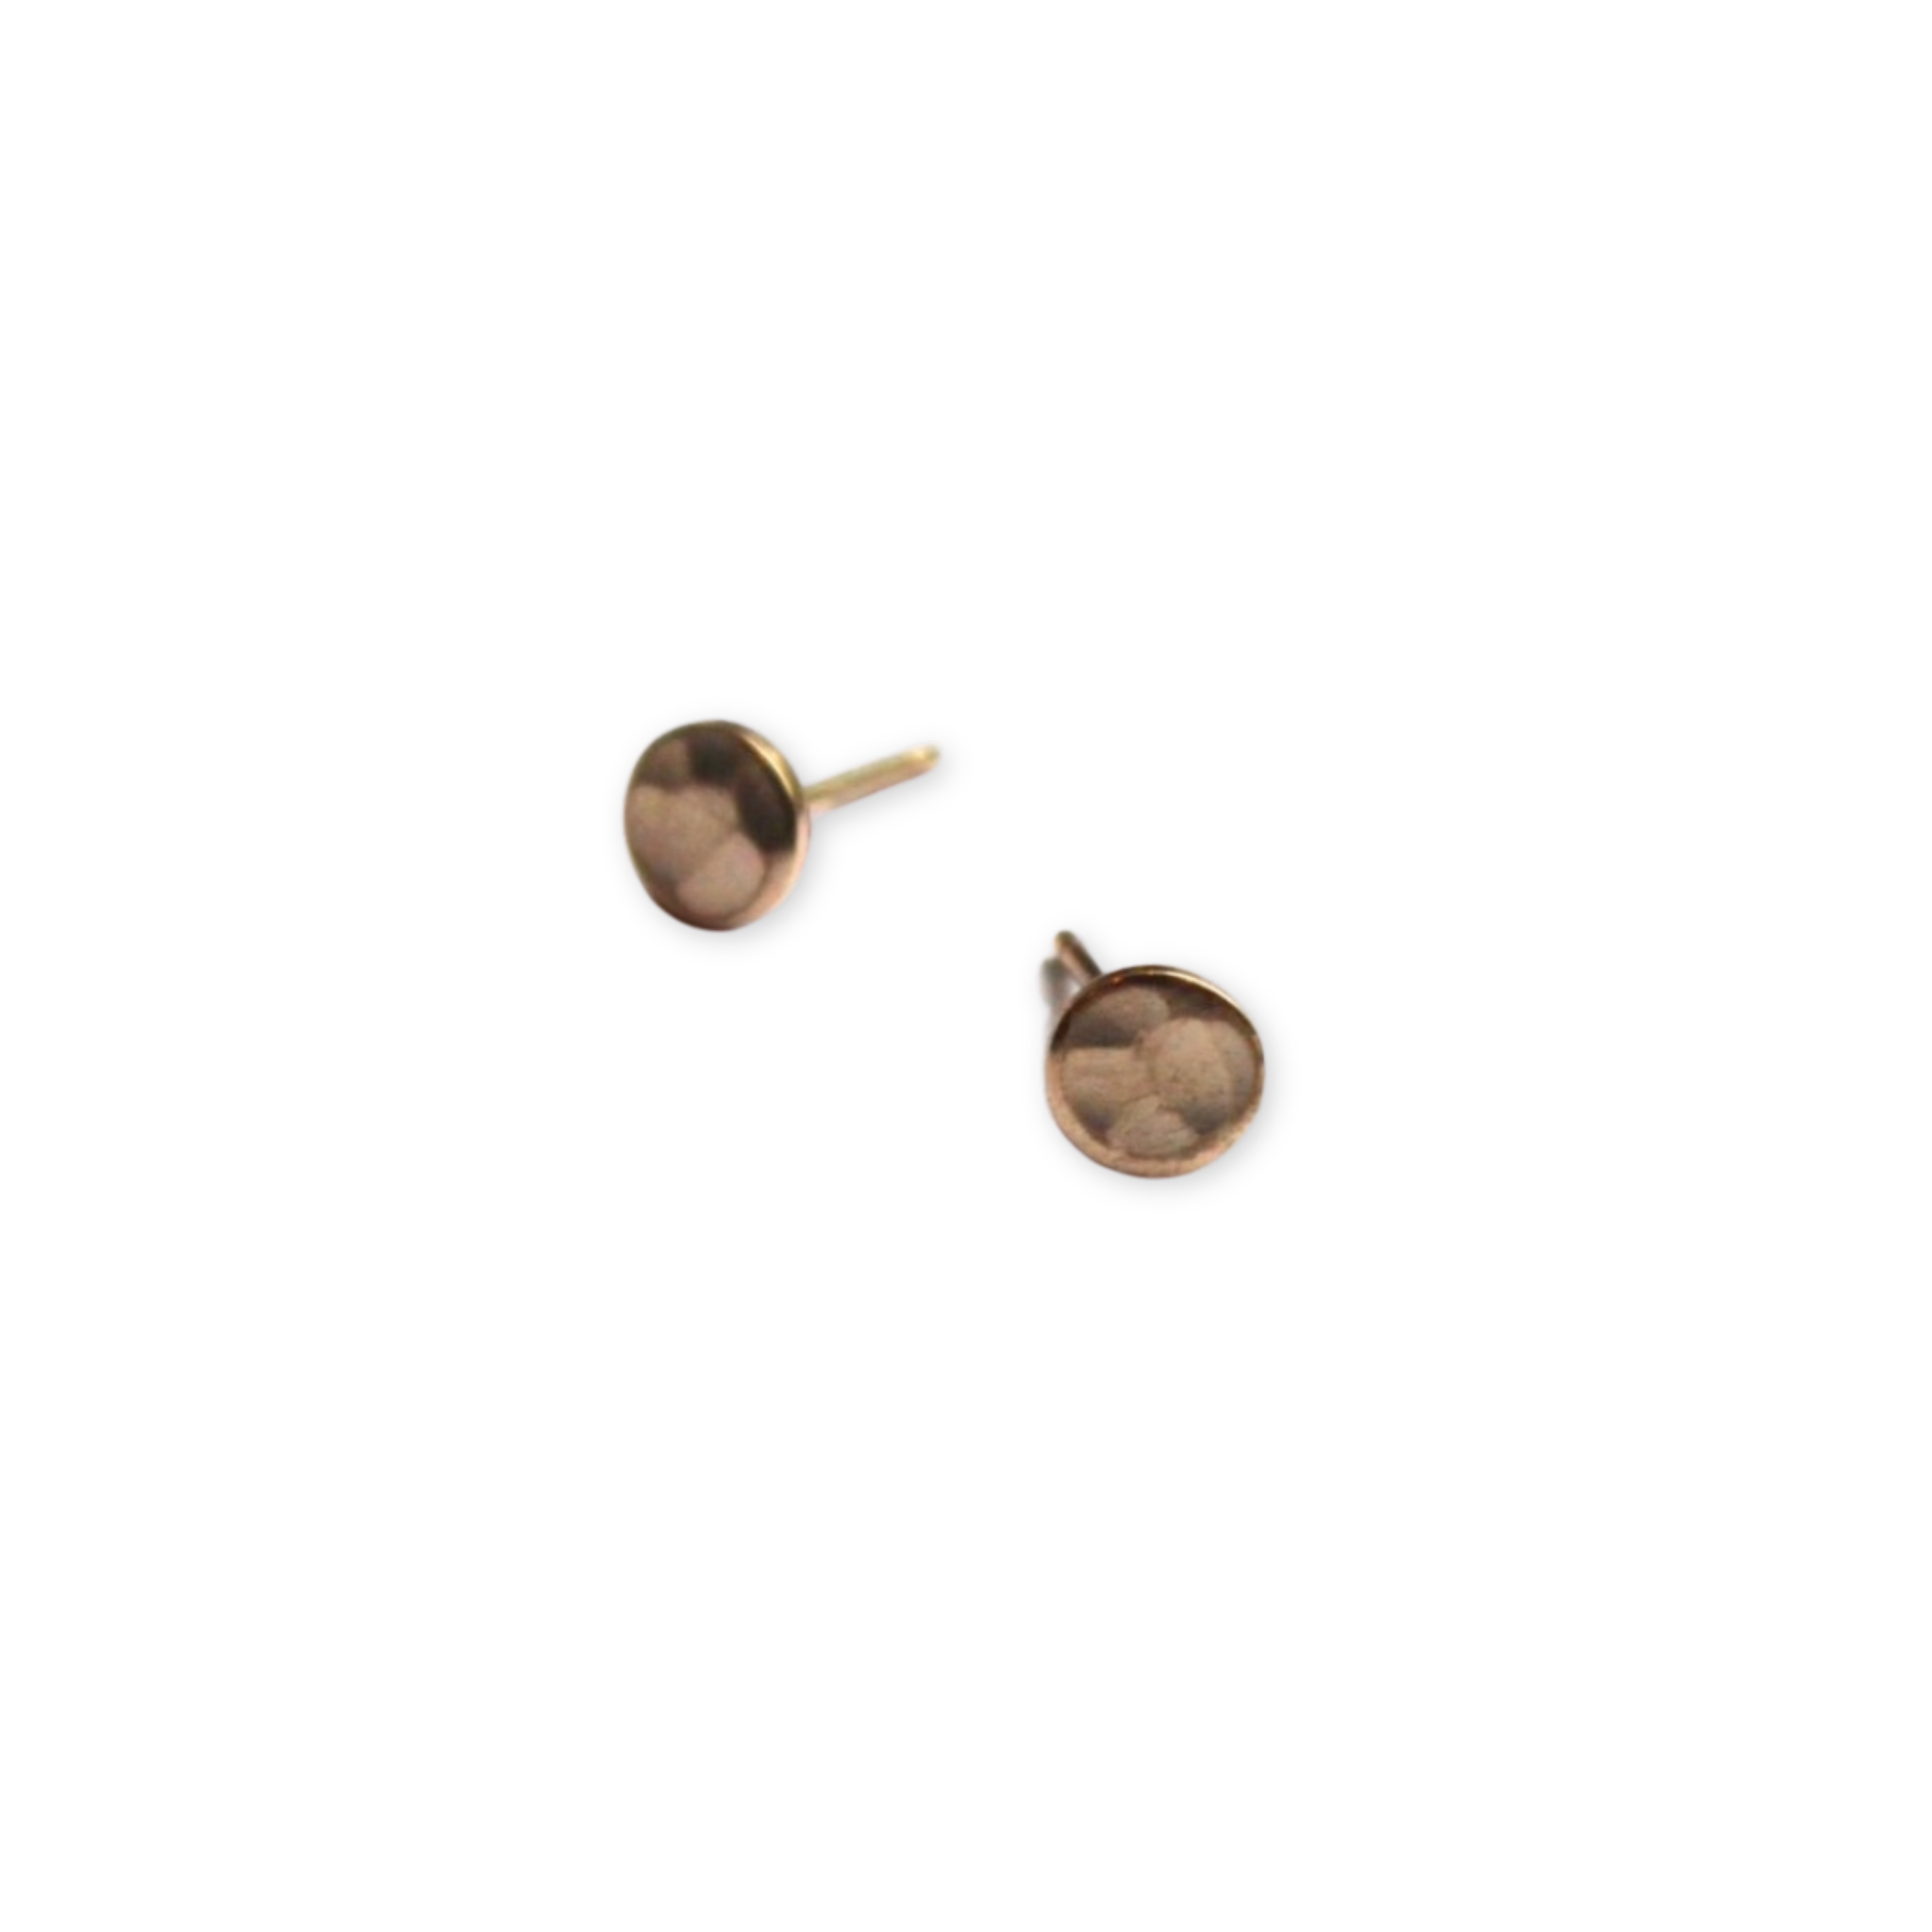 tiny stud earrings with small textured round discs